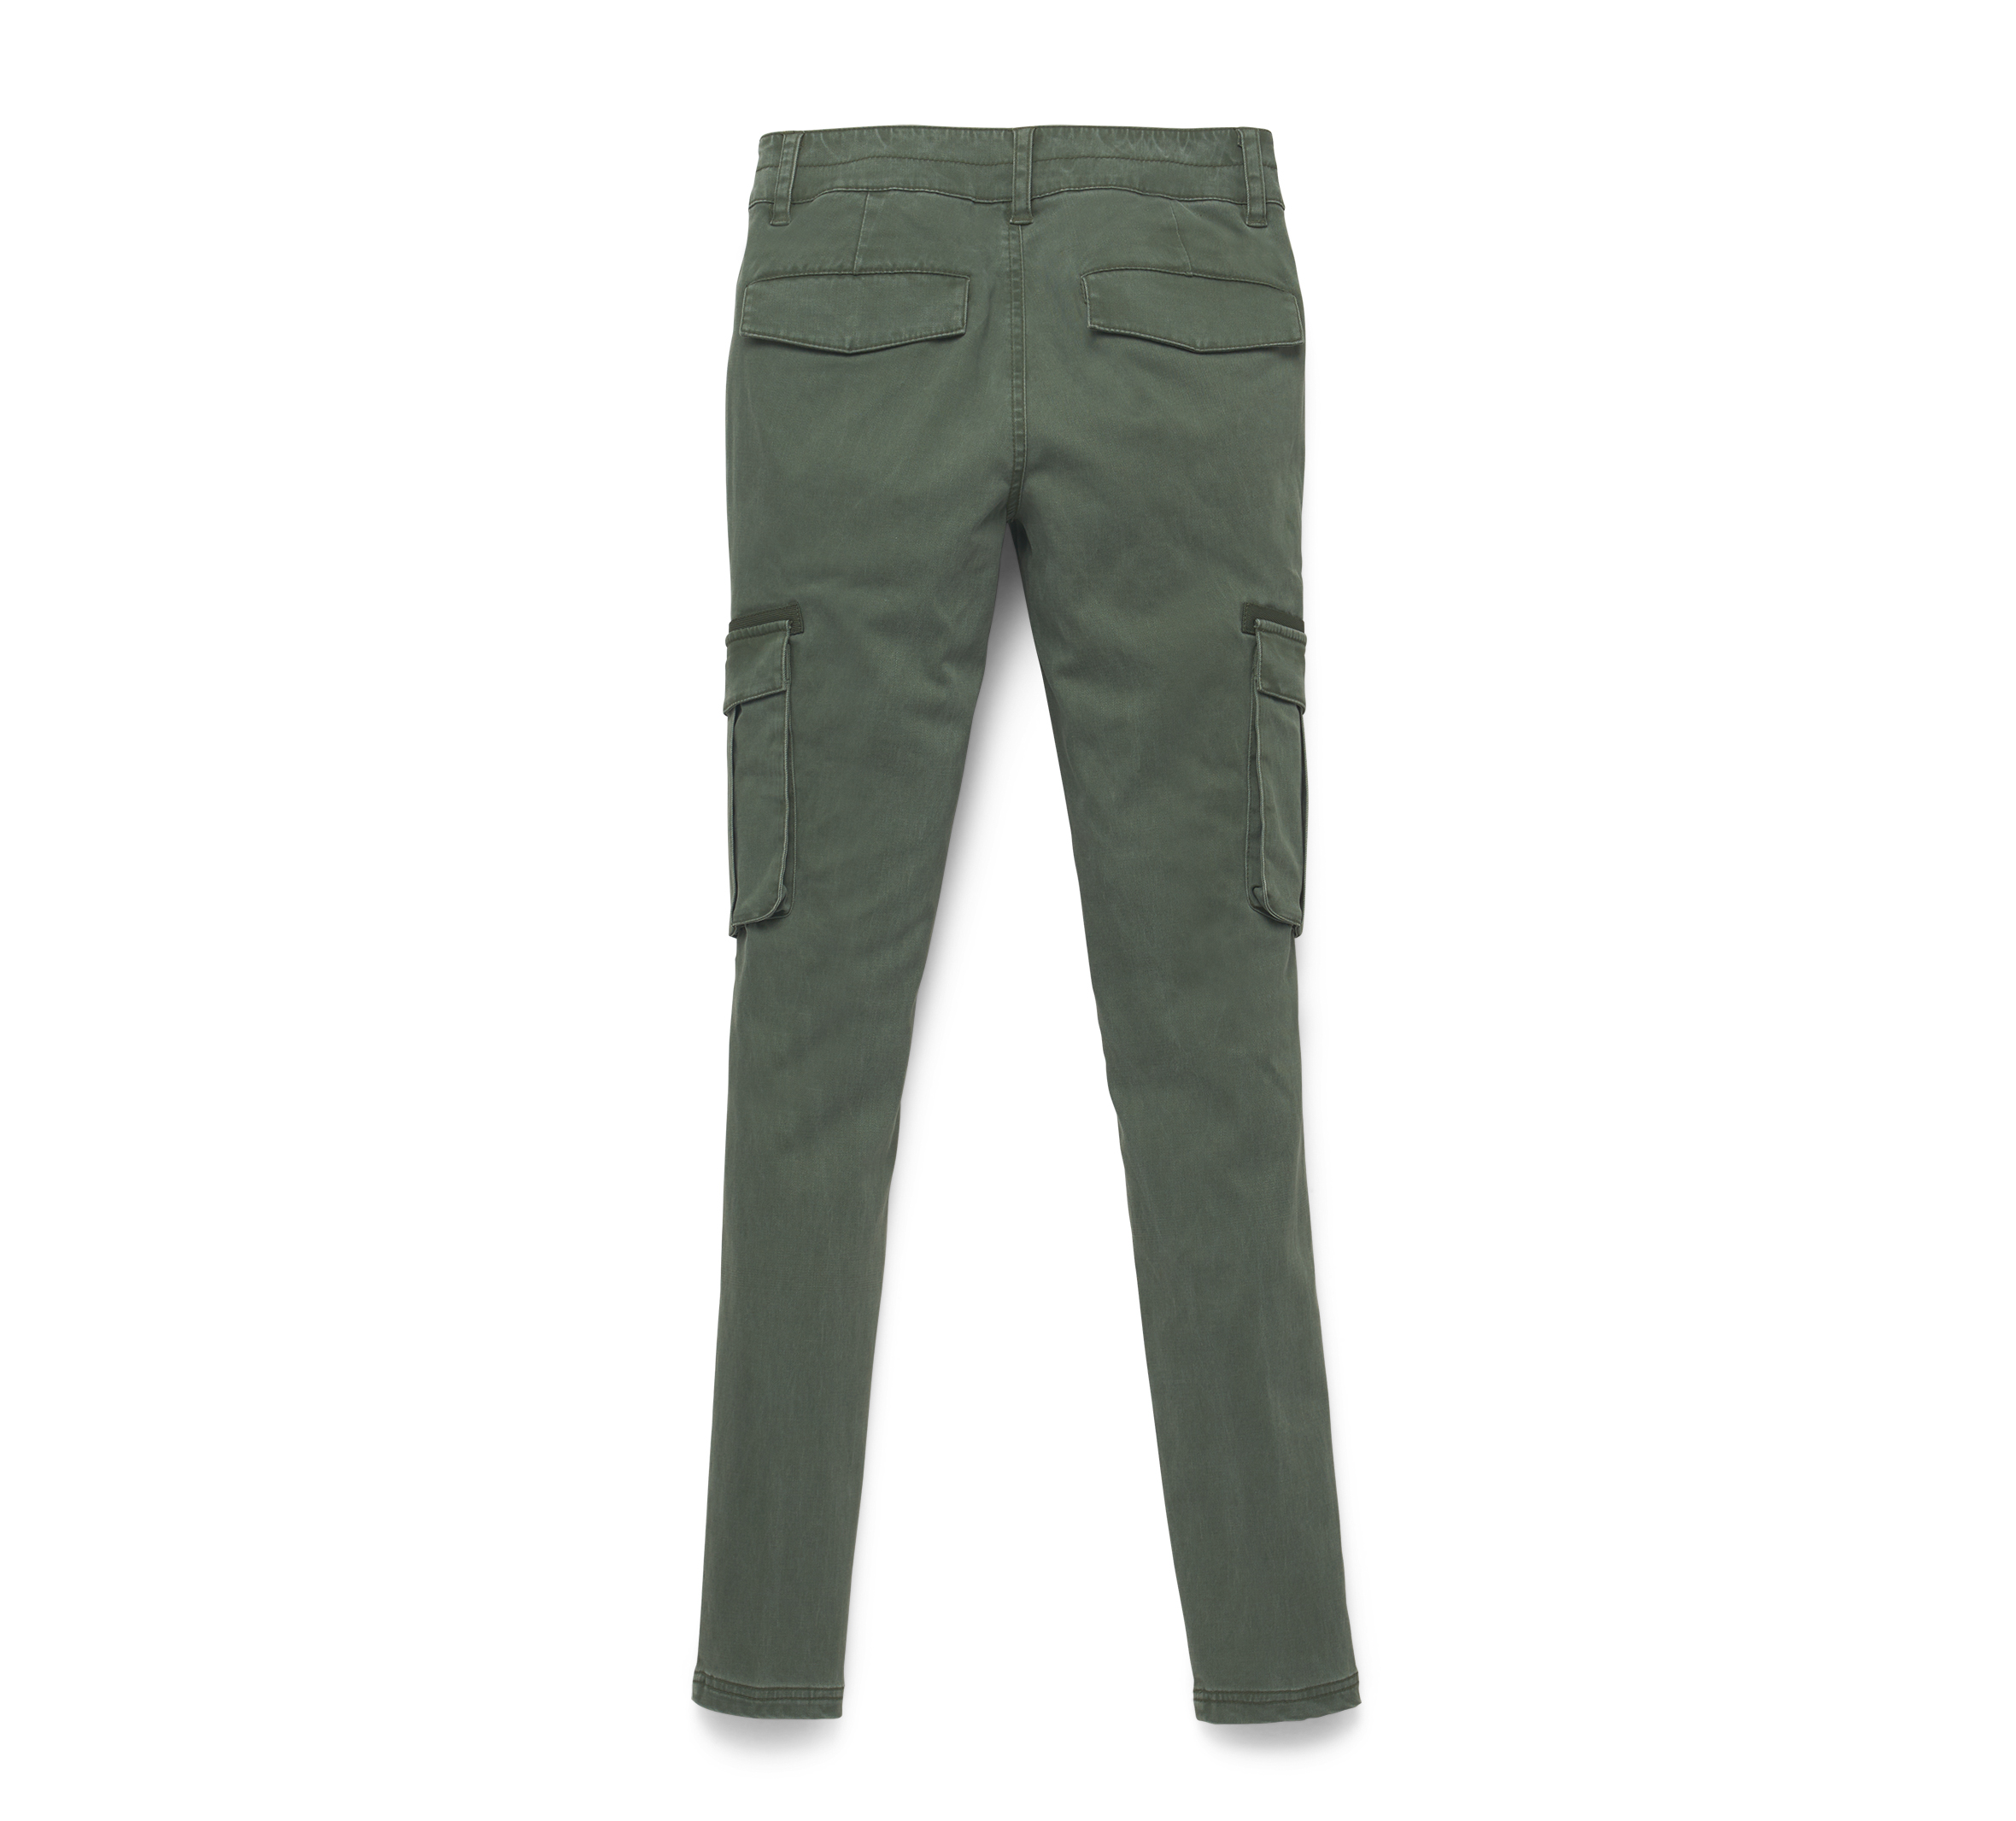 Cargo Trousers & Pants in the color beige for Women on sale | FASHIOLA INDIA